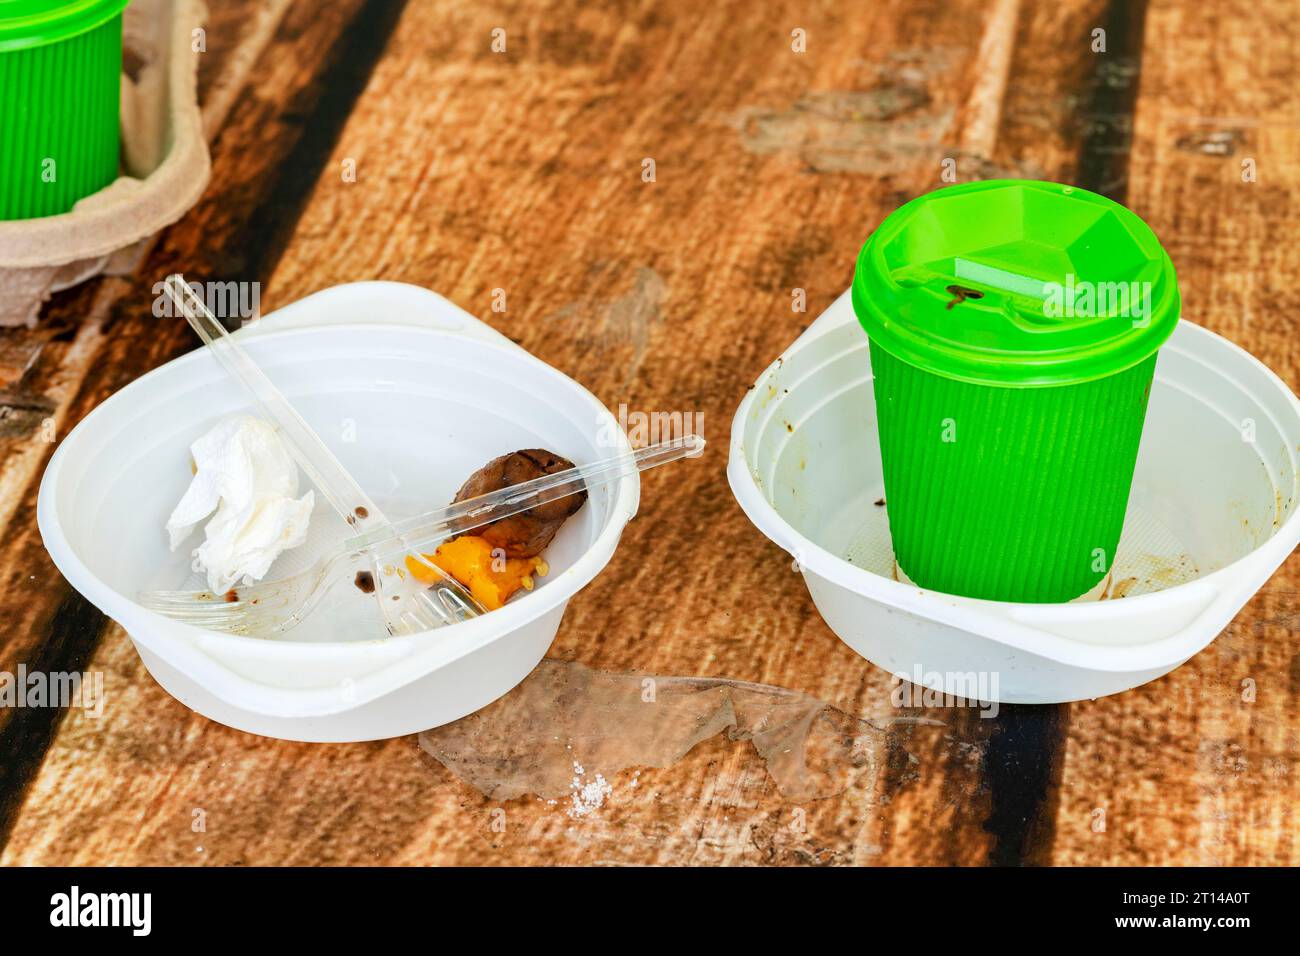 https://c8.alamy.com/comp/2T14A0T/dirty-plate-and-tableware-after-a-meal-plastic-ware-disposable-devices-for-food-it-is-a-lot-of-white-plastic-spoons-2T14A0T.jpg